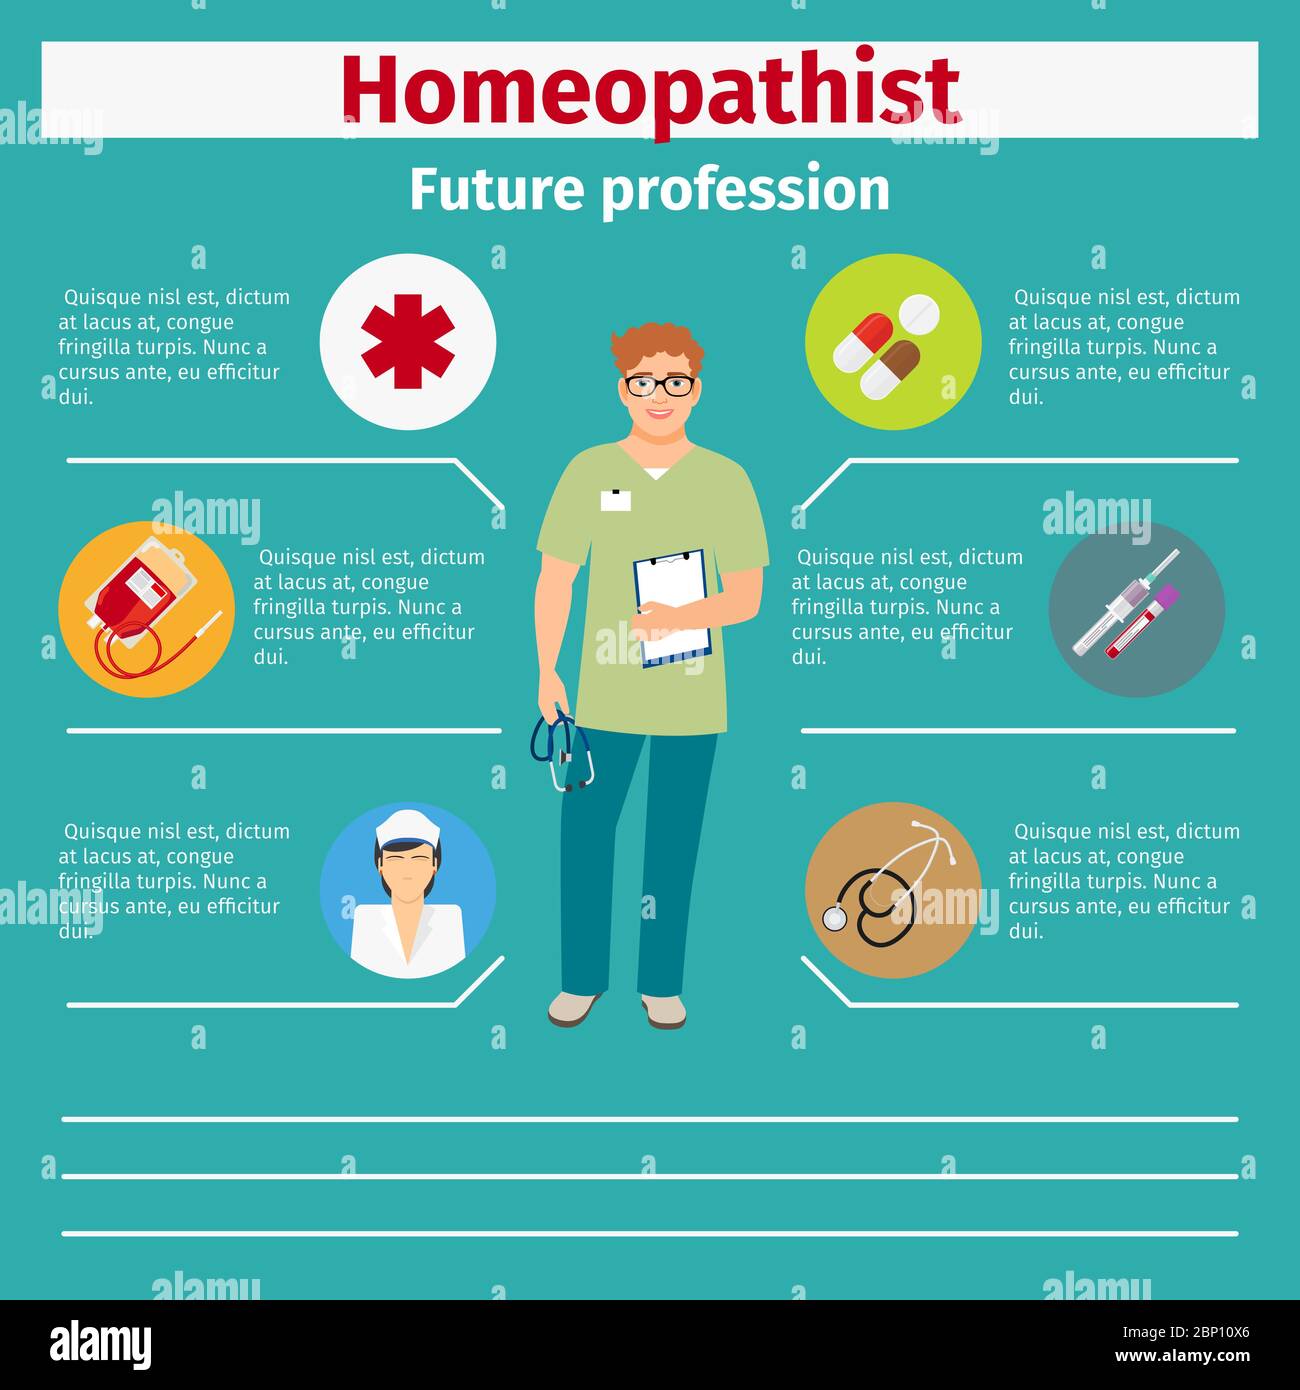 Future profession homeopathist infographic for students, vector illustration Stock Vector